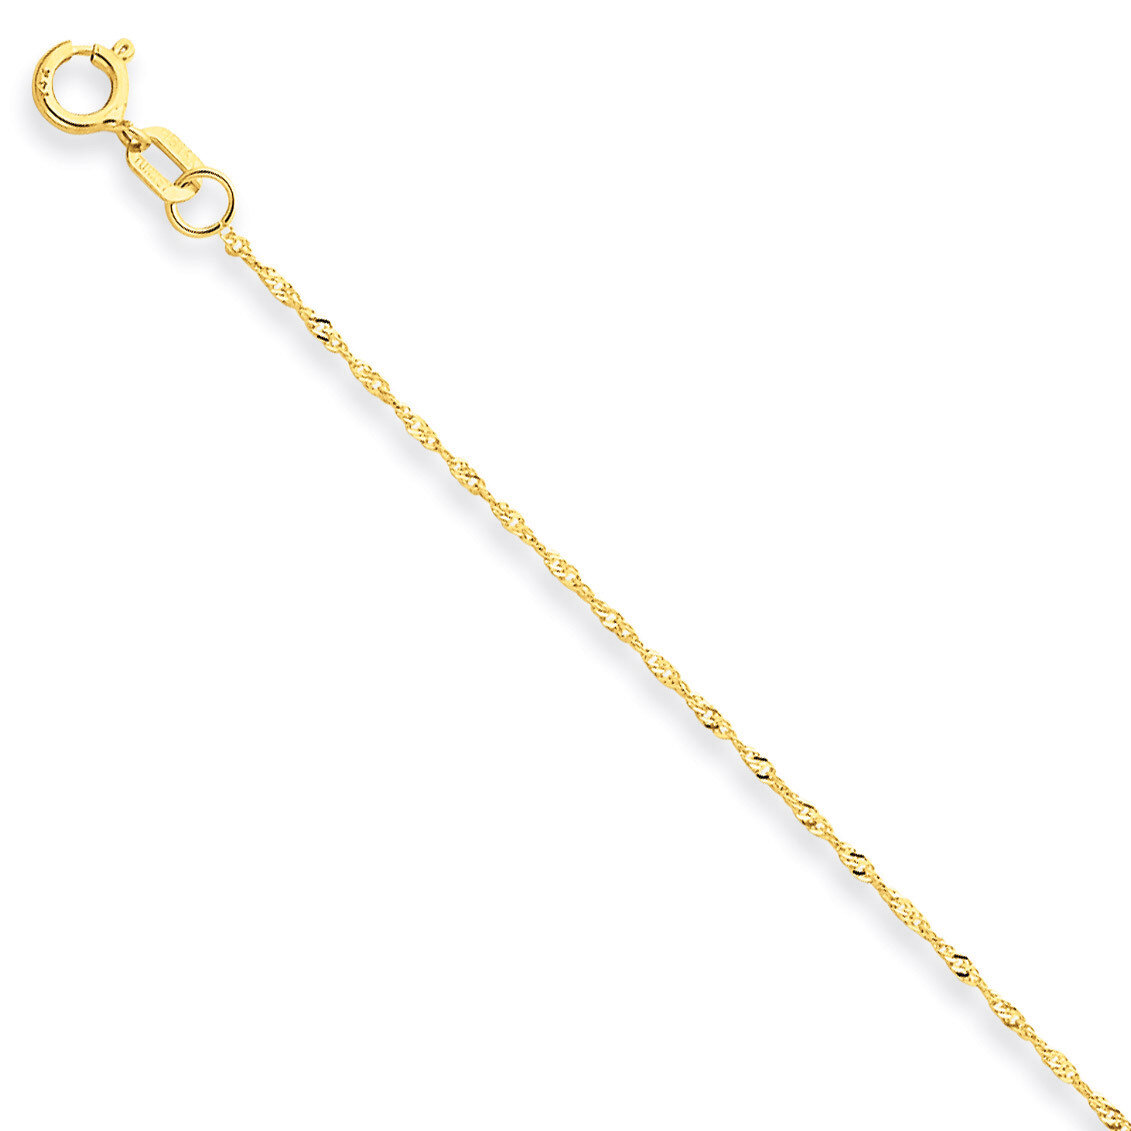 1mm Singapore Chain (CARDED) 24 Inch 14k Gold 10SY-24